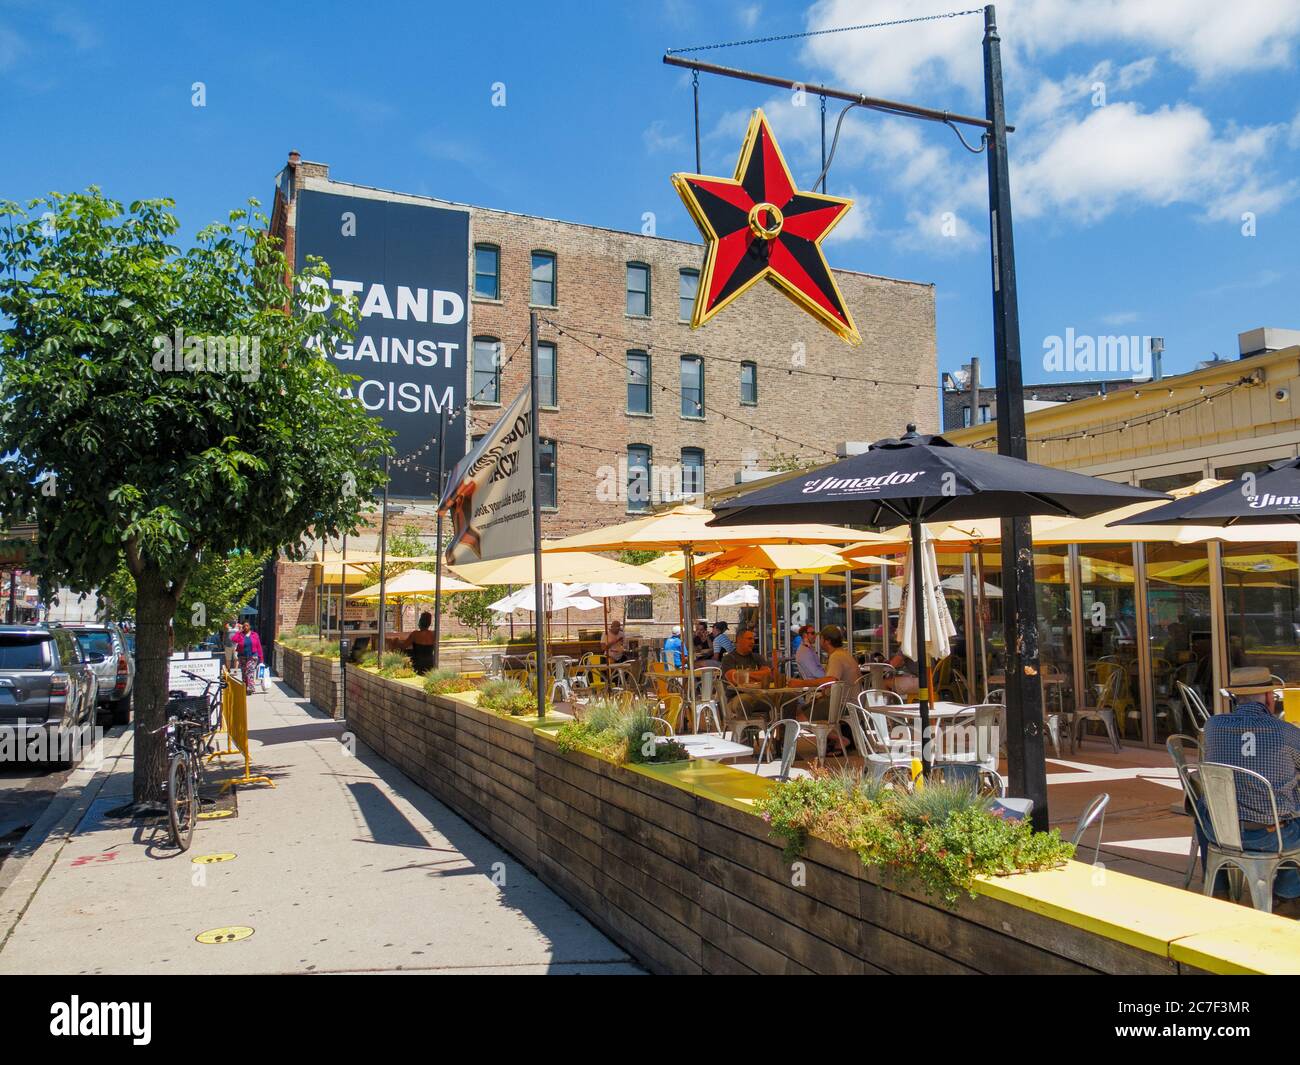 Big Star Restaurant outdoor eating area, social distancing markers on sidewalk. Stand Against Racism banner on building in background. Damen Avenue, Wicker Park neighborhood, Chicago, Illinois. Stock Photo